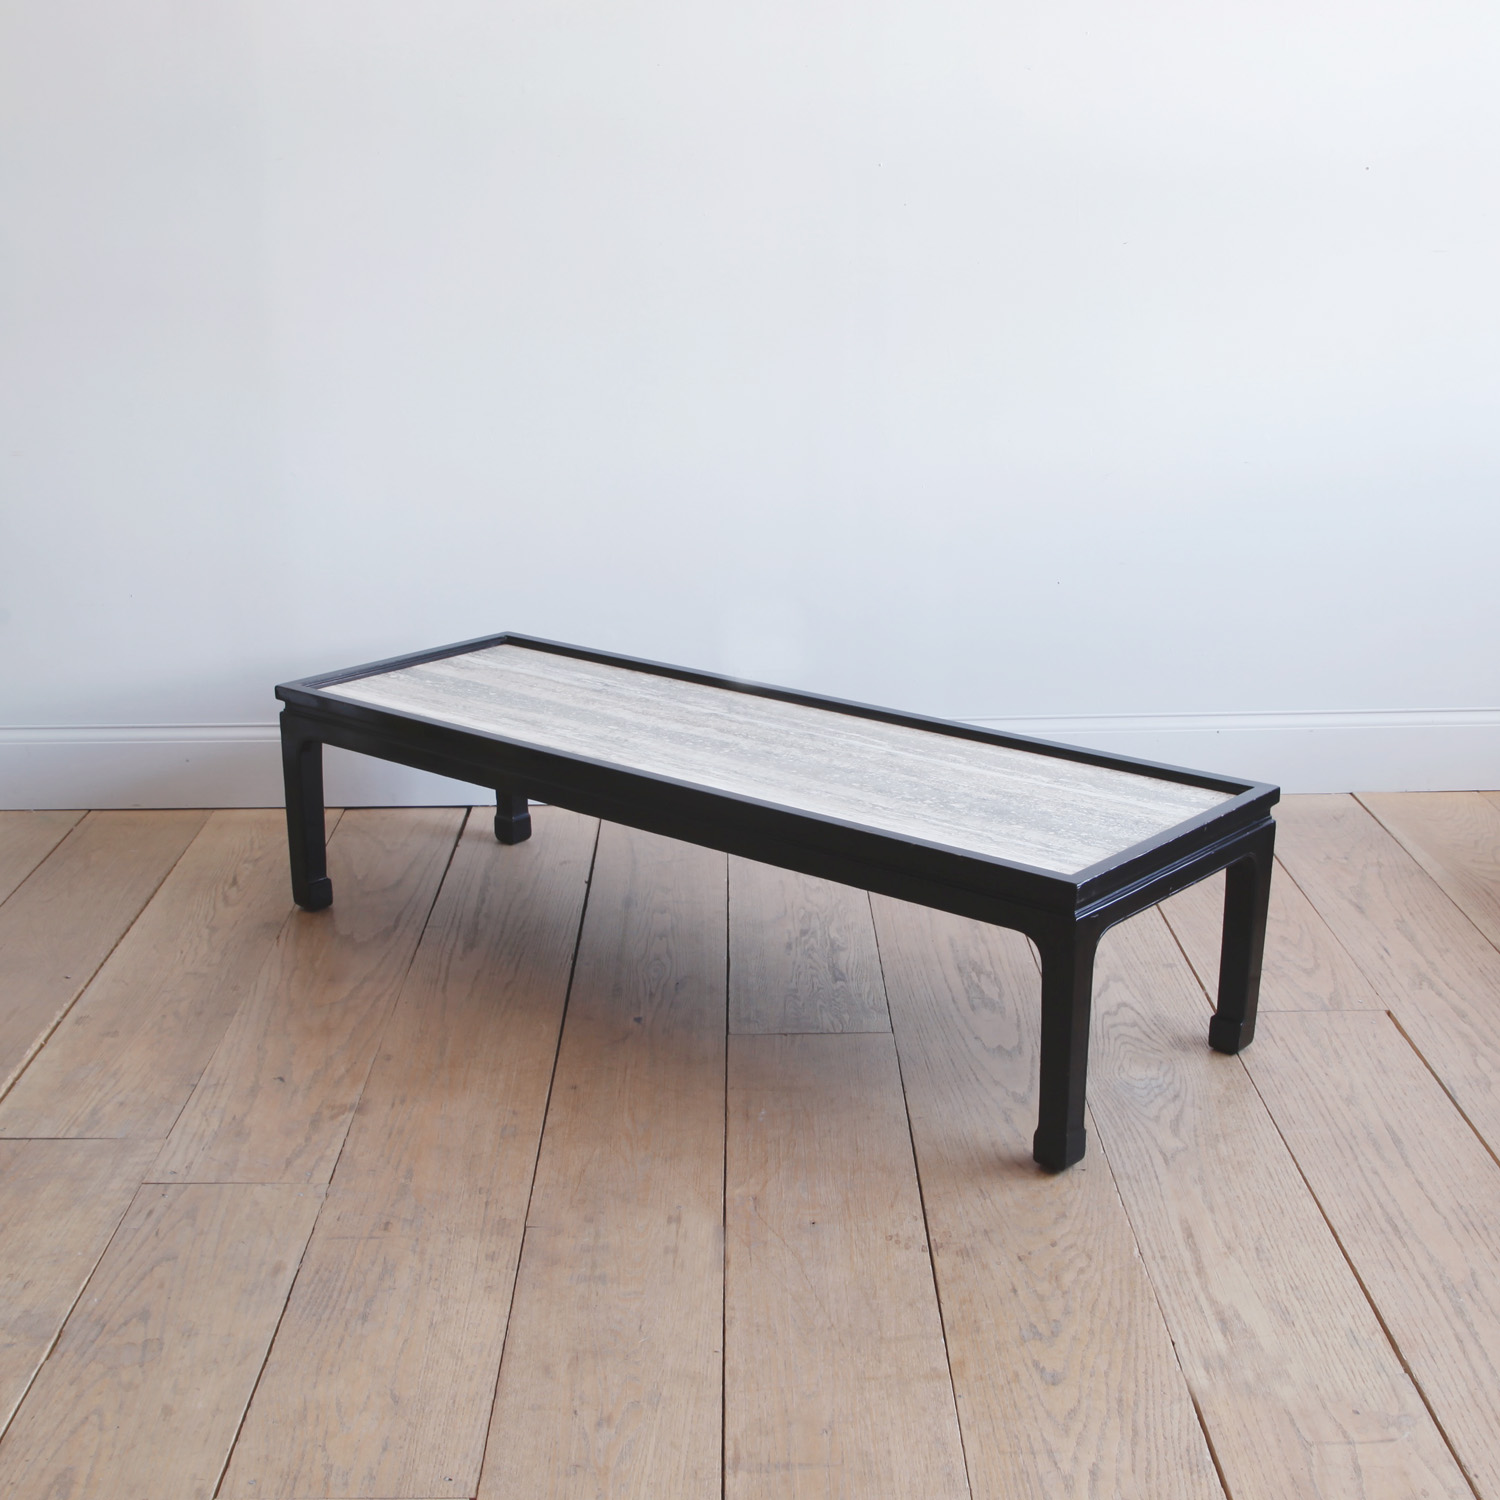 Black Lacquer Chinese-style Coffee Table with Travertine Top